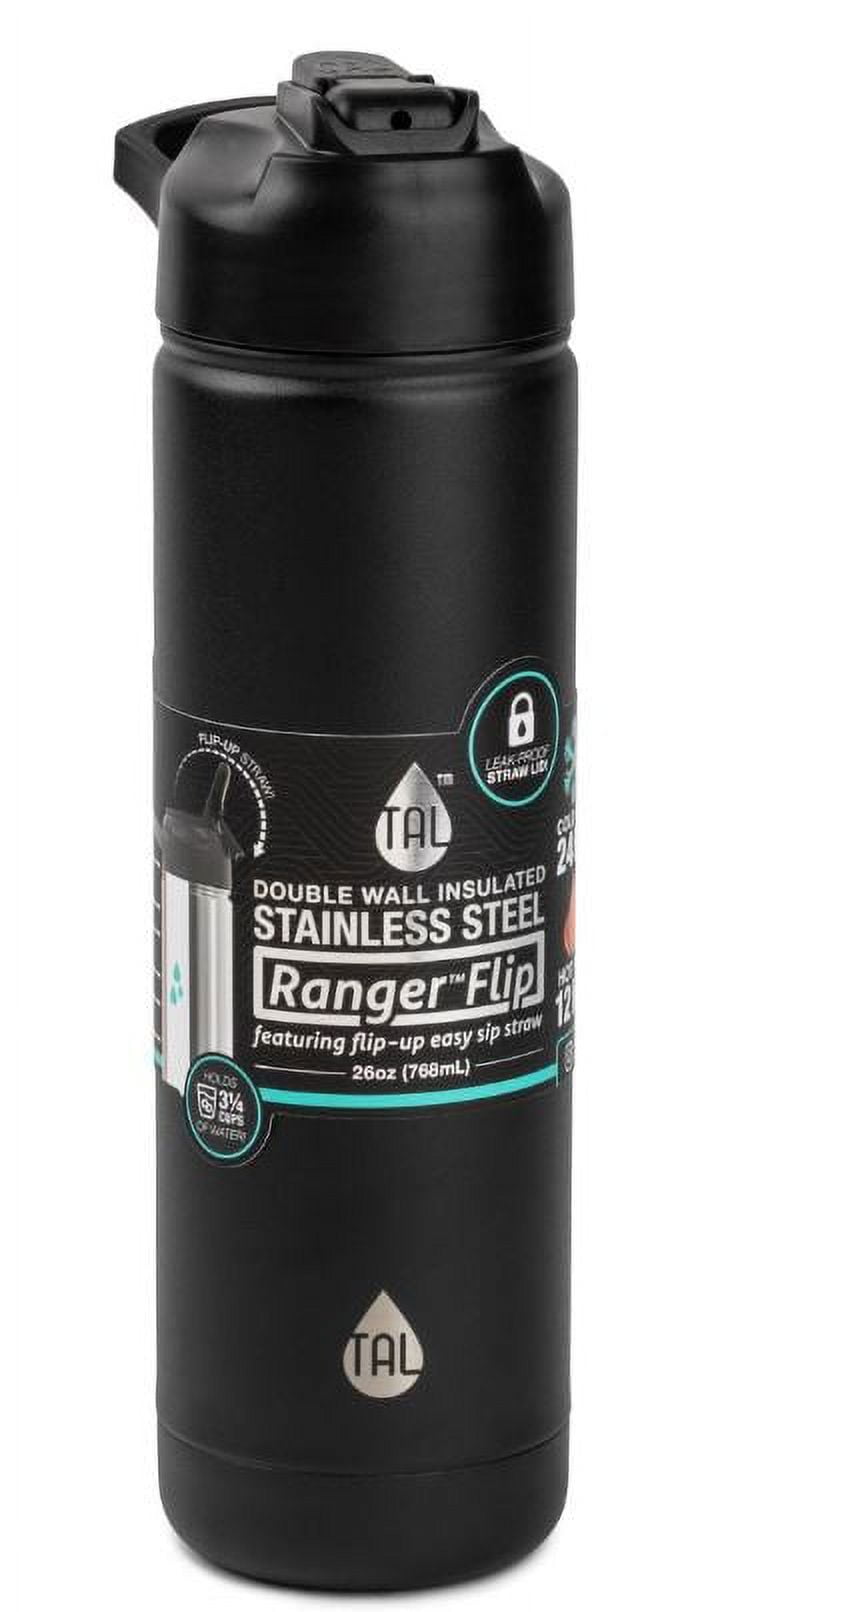 Tal Water Bottle Double Wall Insulated Stainless Steel Ranger Pro - 26oz -  Black